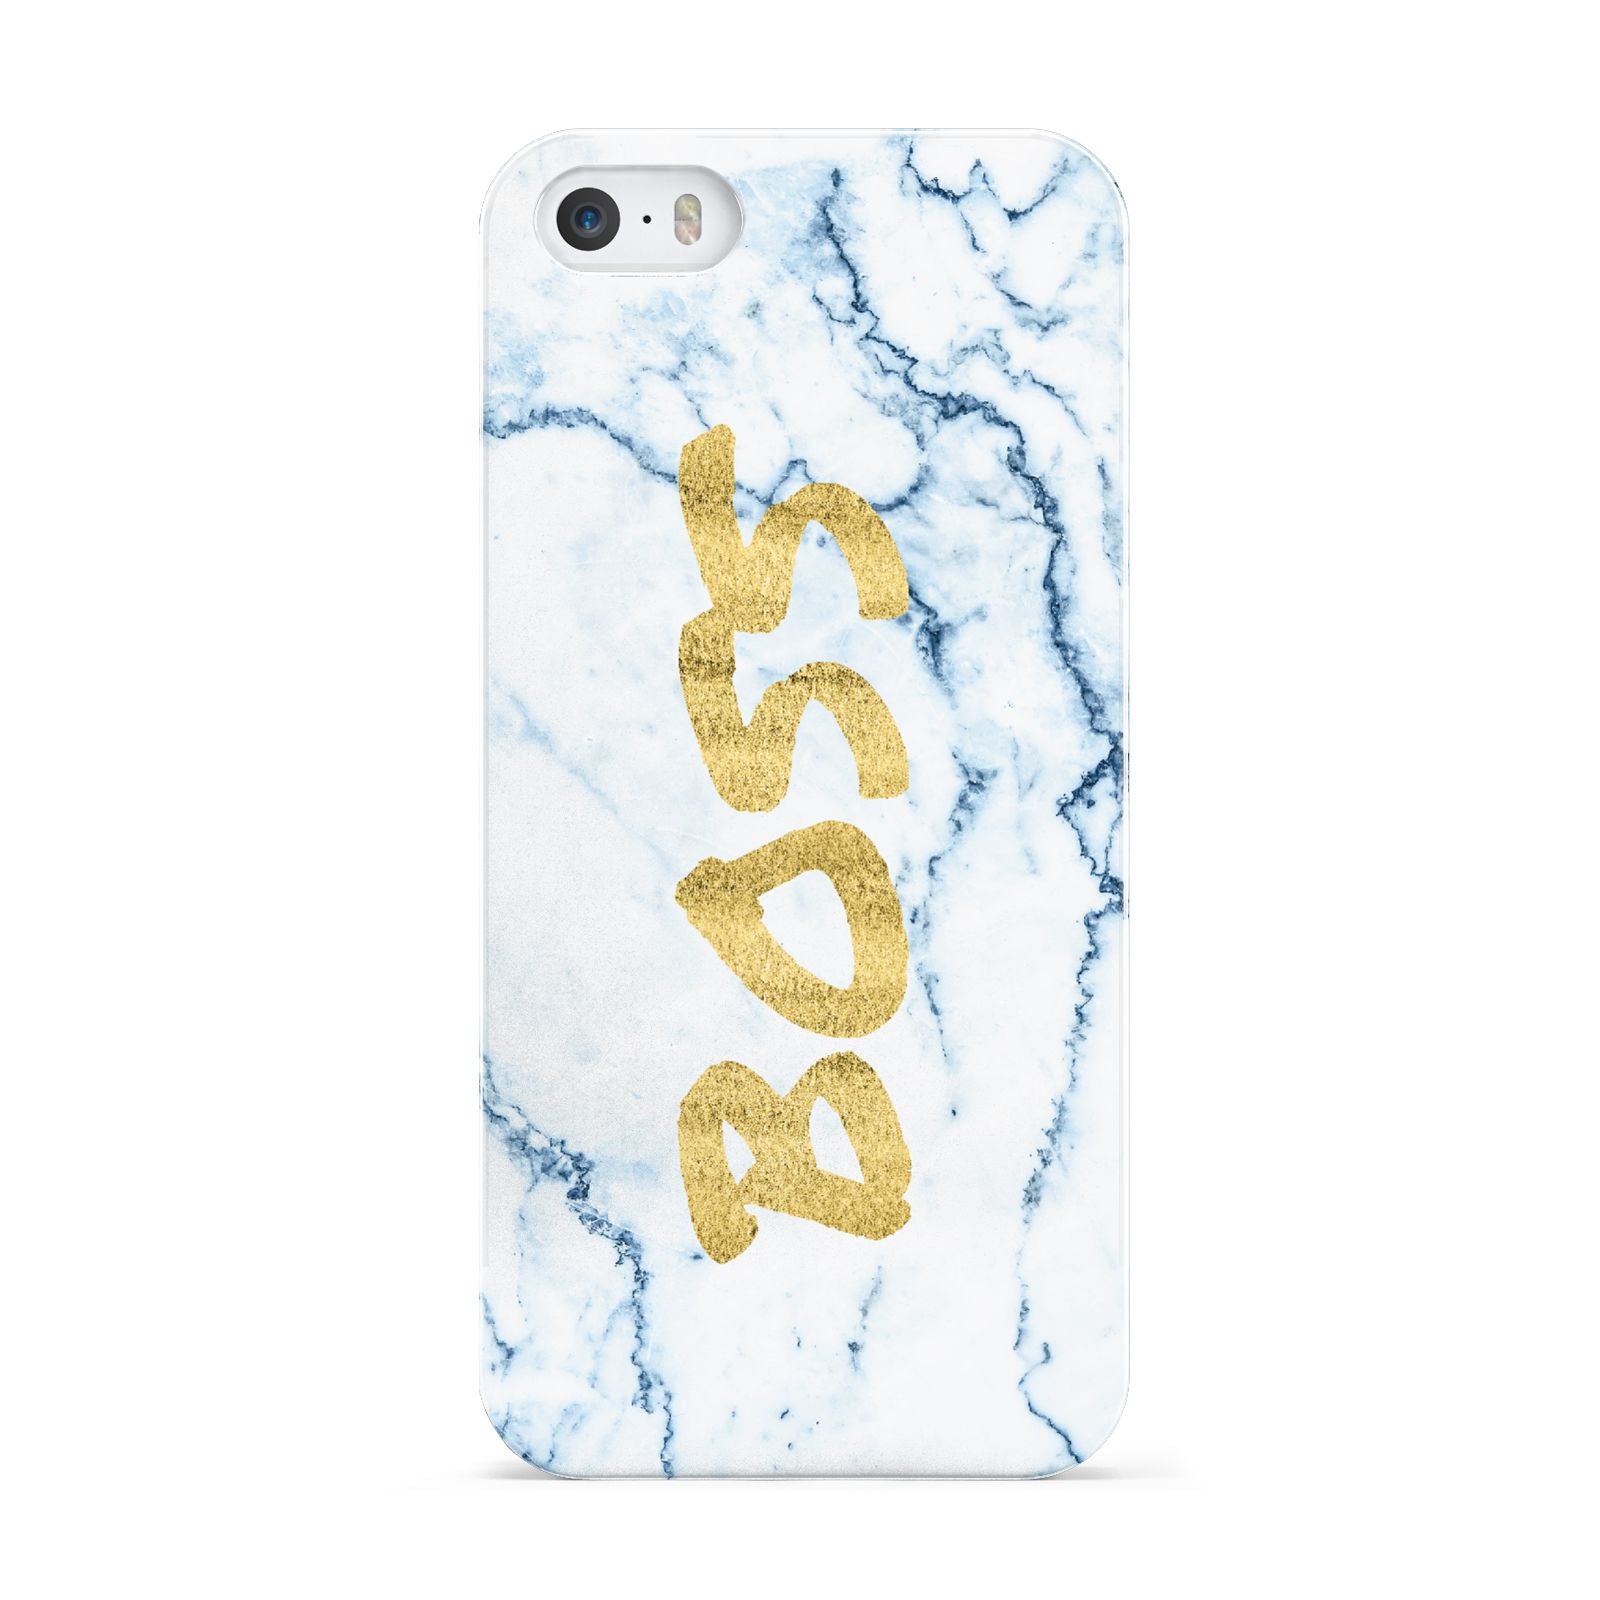 Boss Gold Blue Marble Effect Apple iPhone 5 Case